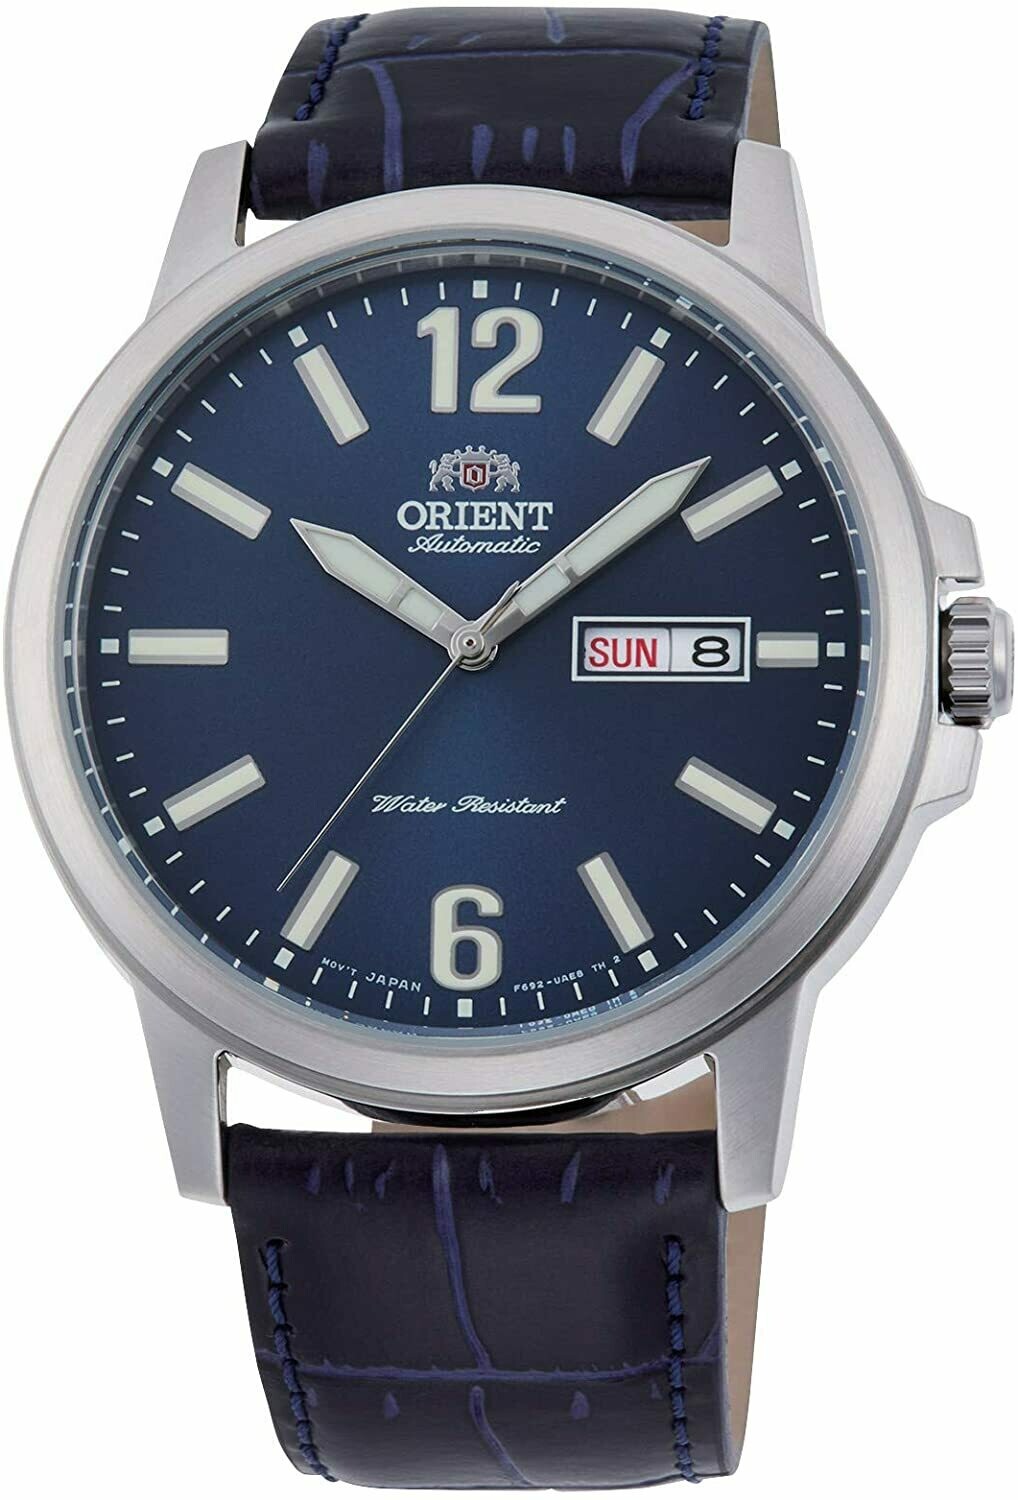 Automatic Men's Watch Orient Commuter RA-AA0C05L 41.9mm dial blue leather strap